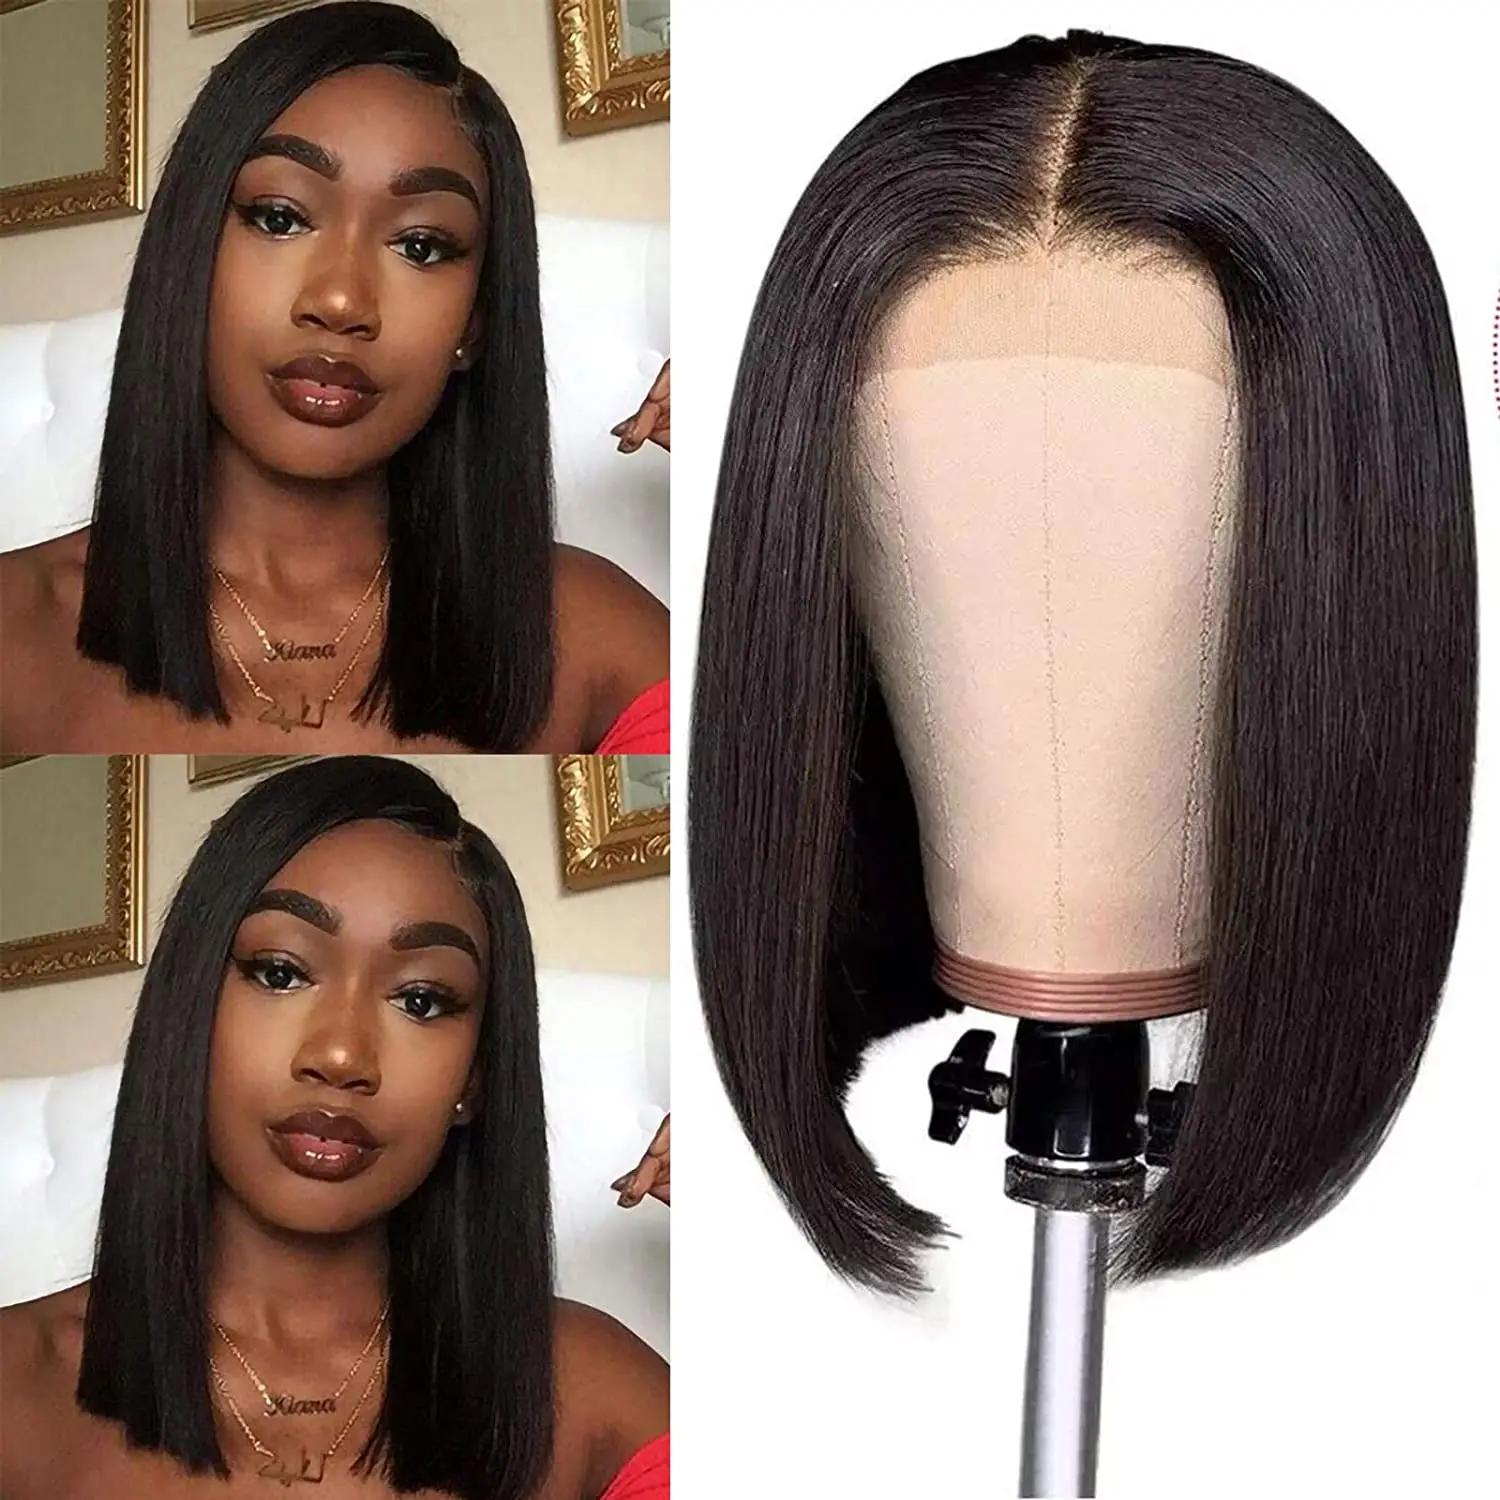 Scheherezade Bob Wig Lace Front Human Hair Wigs Short Human Hair Wigs For Black Women Straight Lace Front Wigs Cheaper Natural